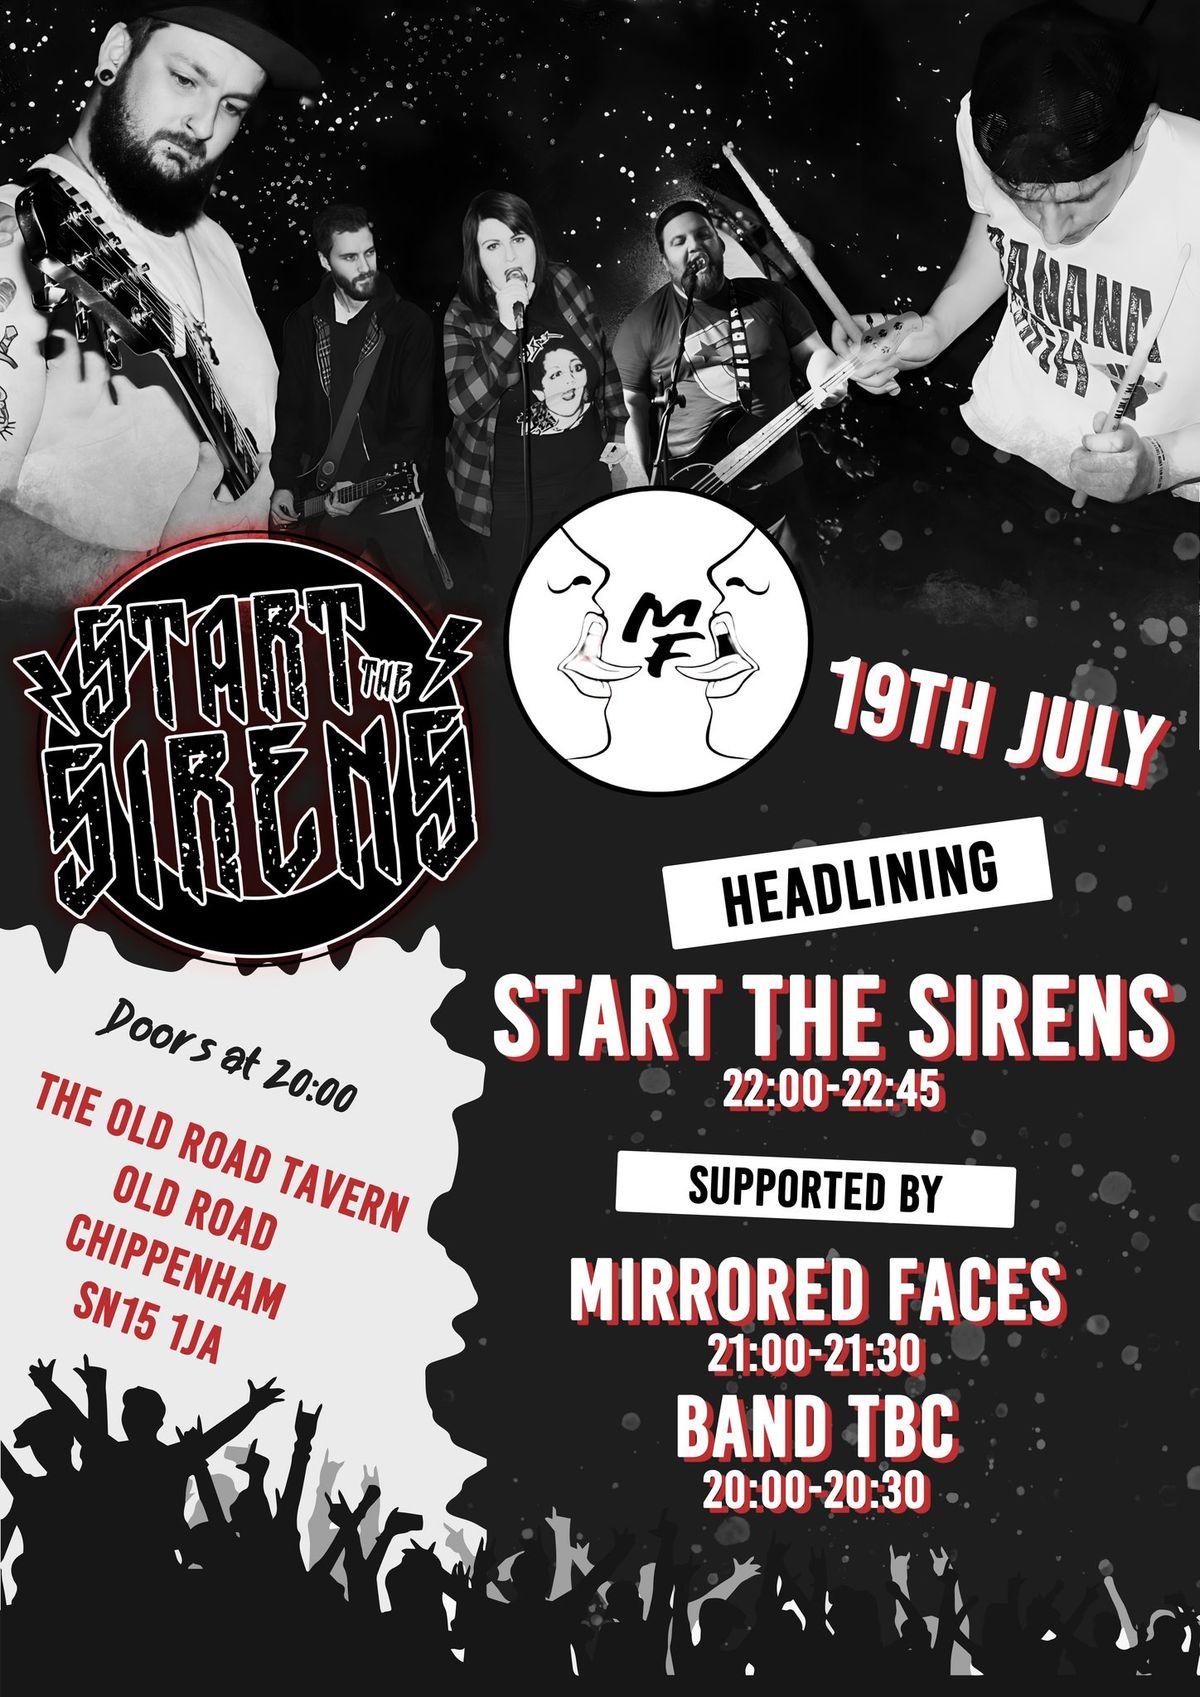 START THE SIRENS + SUPPORT @ THE OLD ROAD TAVERN